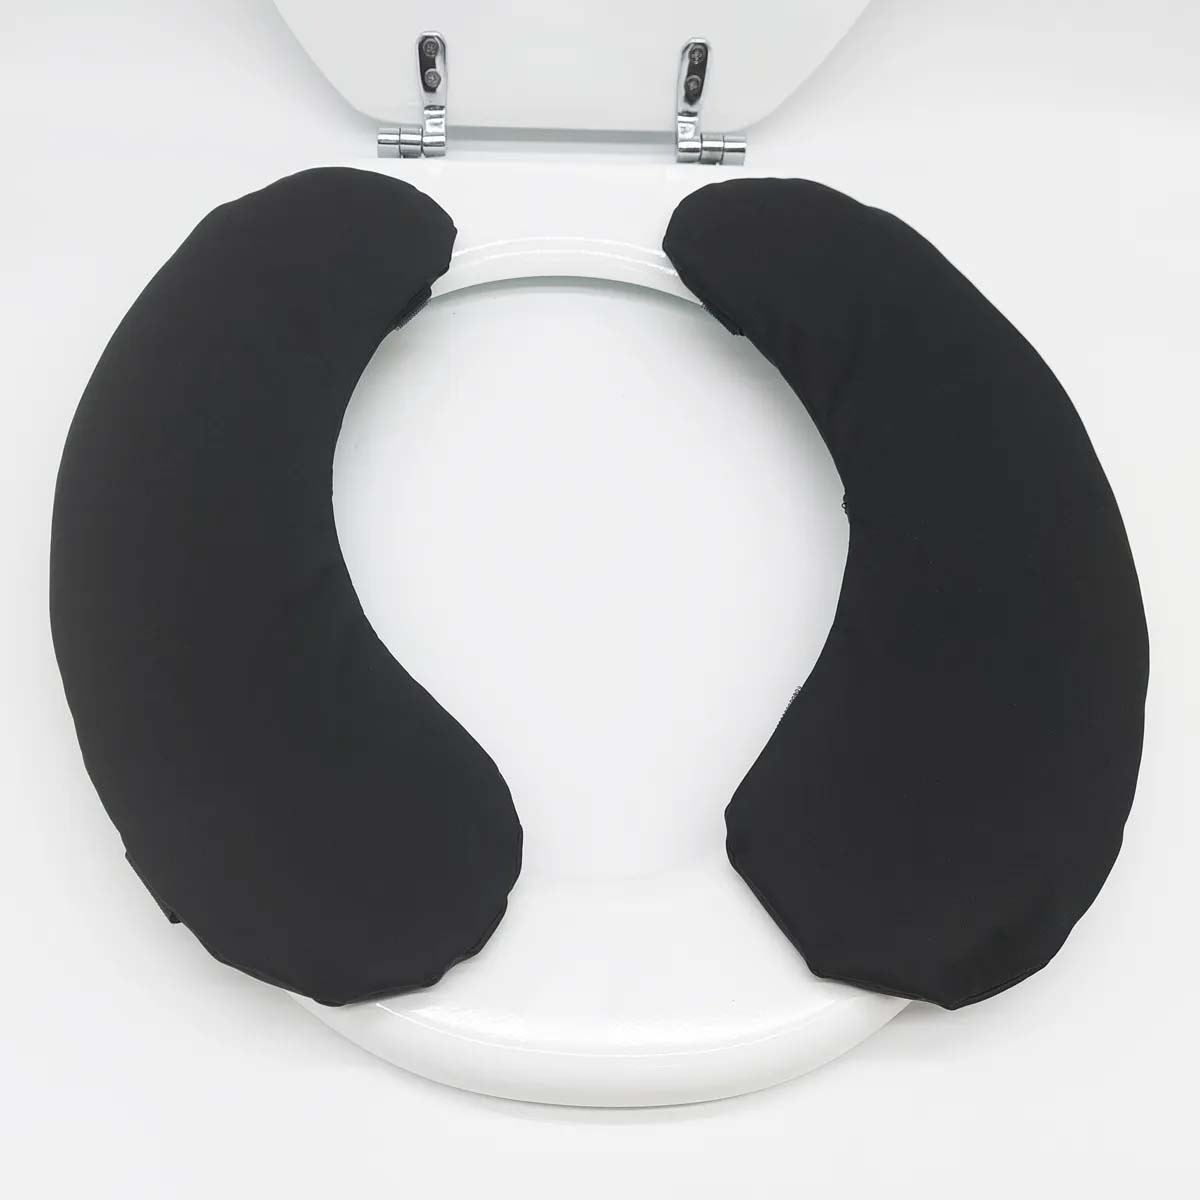 Toilet-shower-seat-pads-with-covers-overlay-bathroom-accessories-online-order-buy-now-uk-easycaresystems